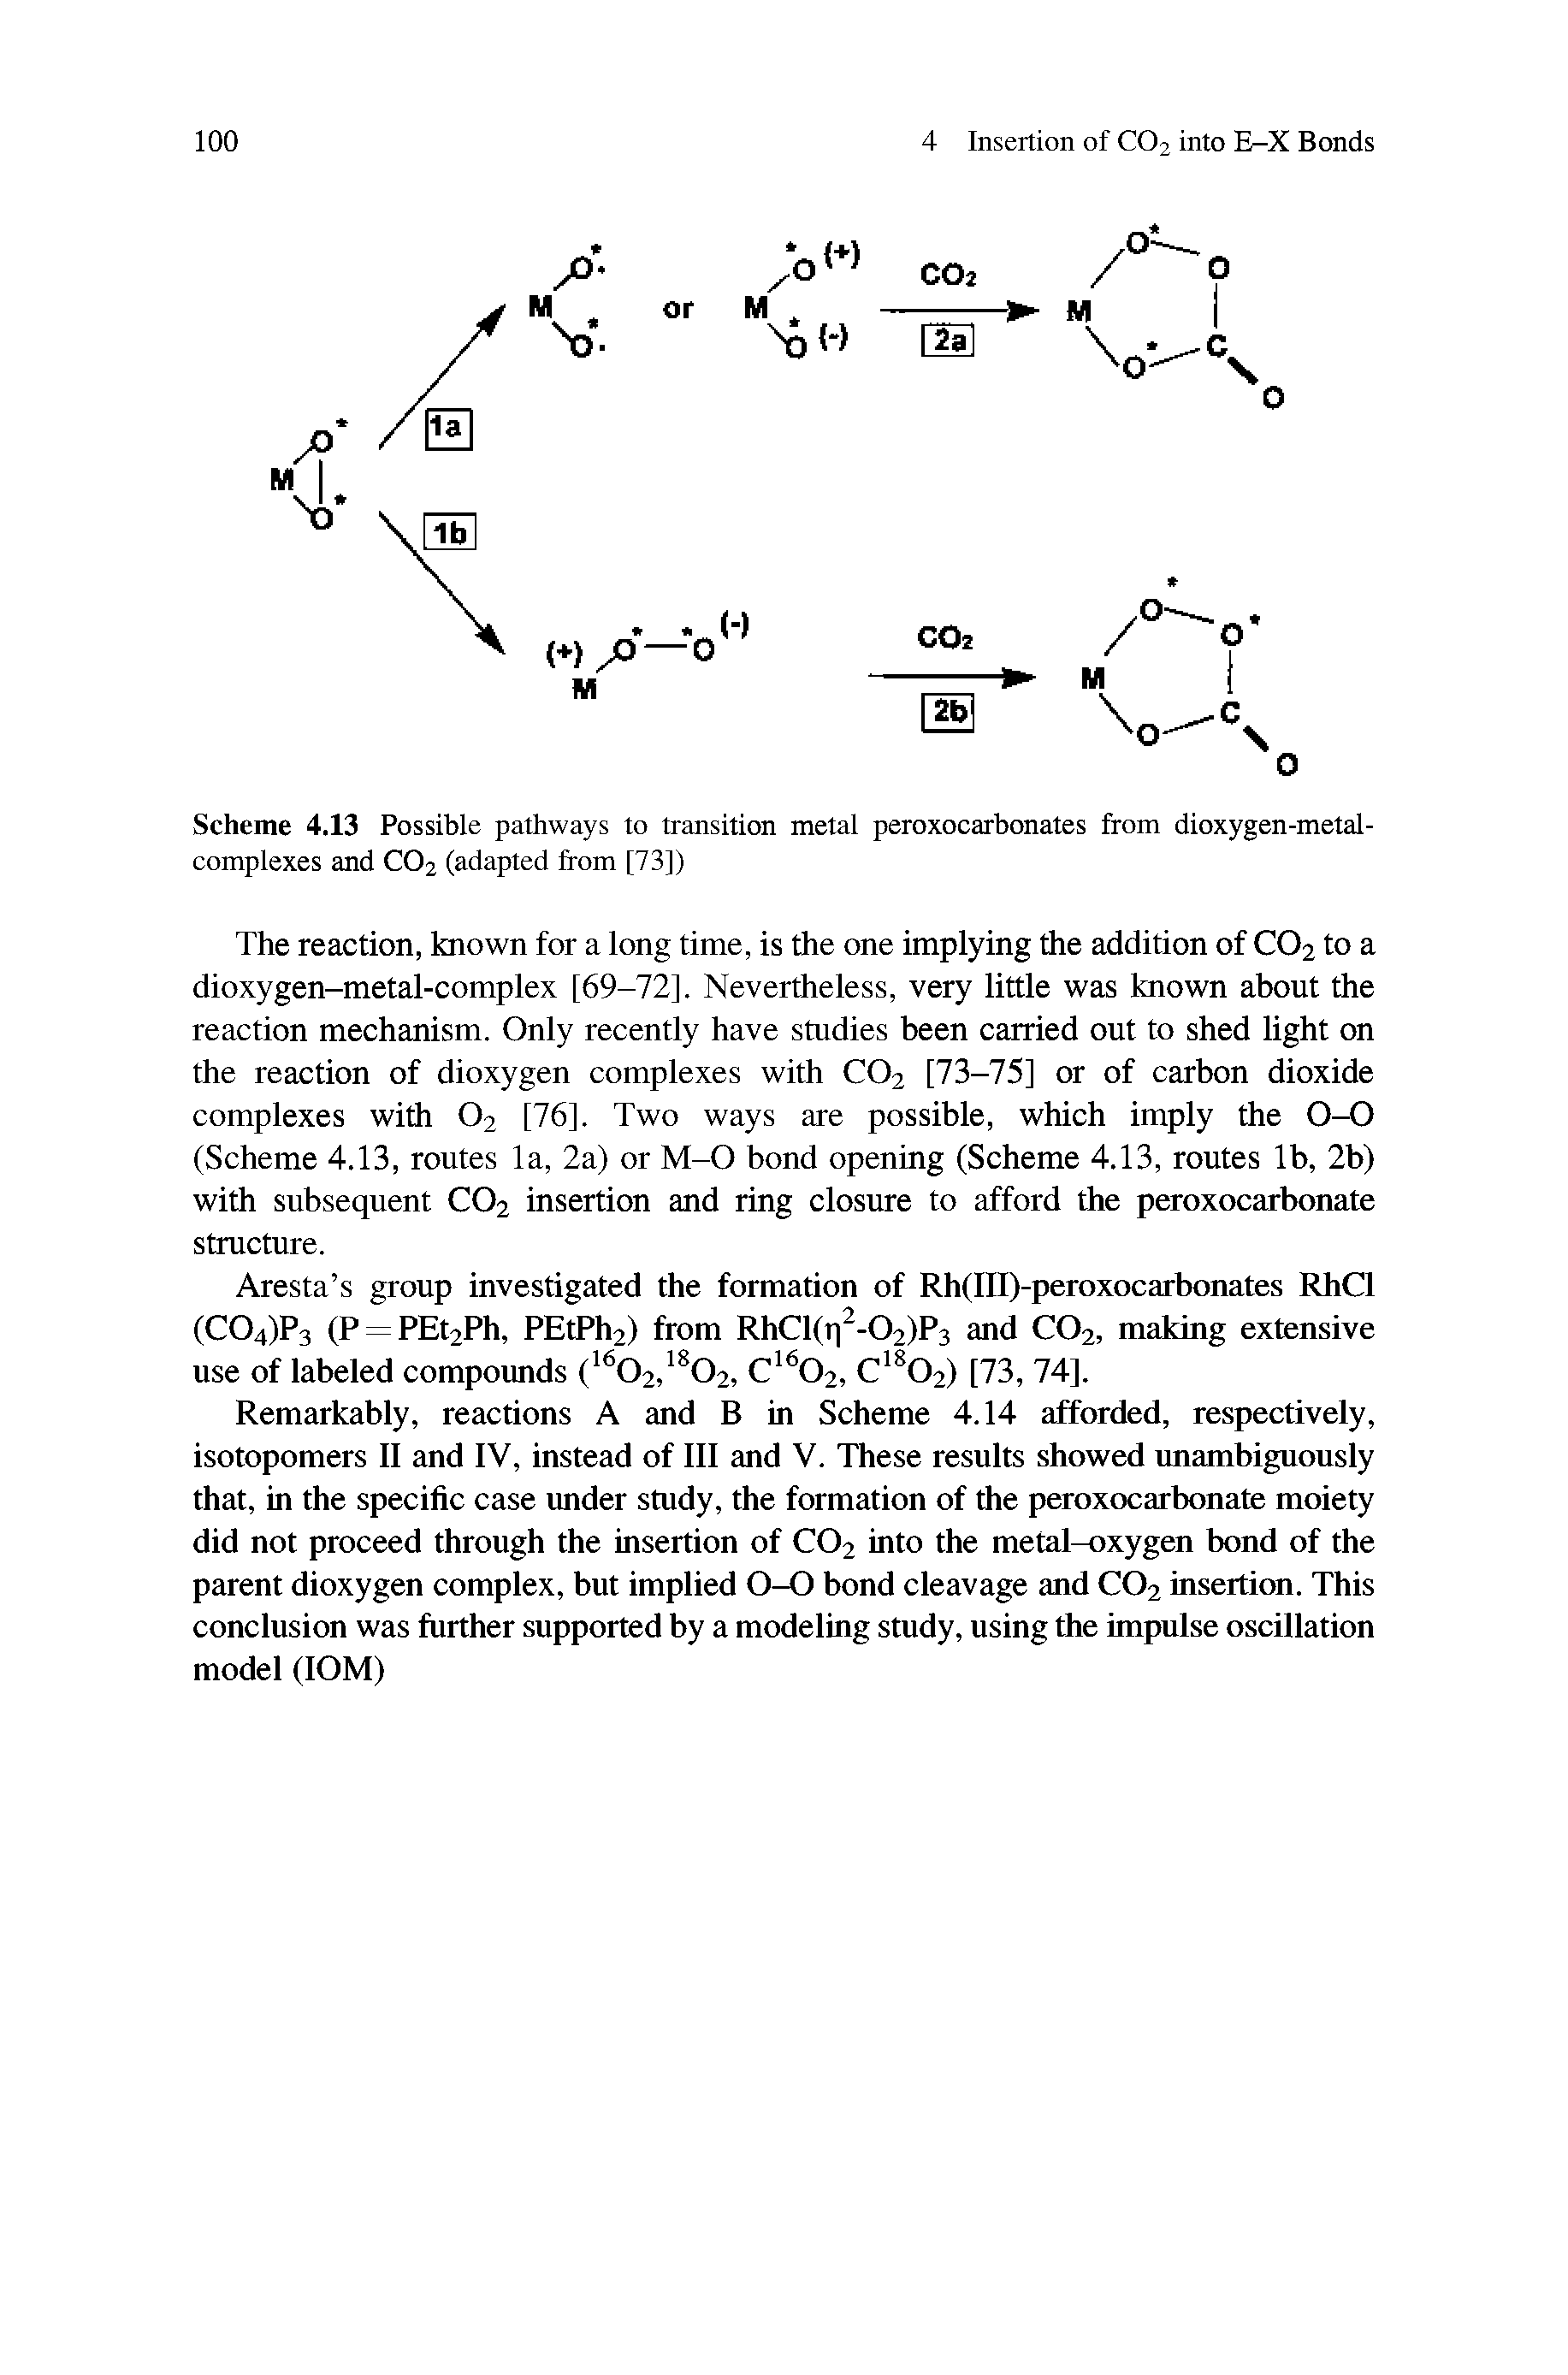 Scheme 4.13 Possible pathways to transition metal peroxocarbonates from dioxygen-metal-complexes and CO2 (adapted from [73])...